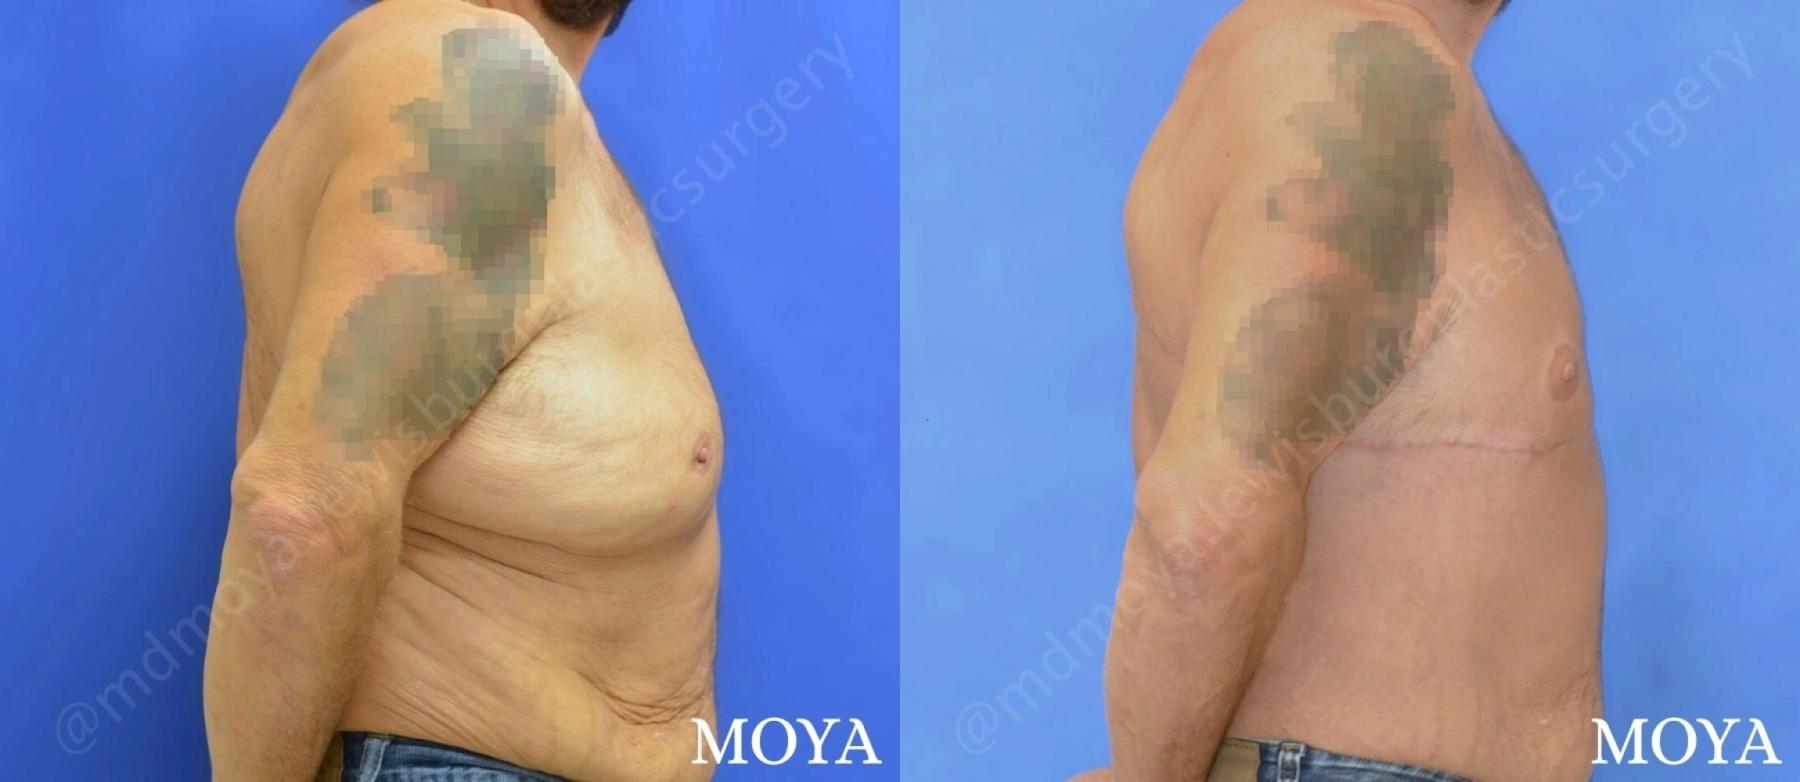 Male Upper Body Lift: Patient 1 - Before and After 3